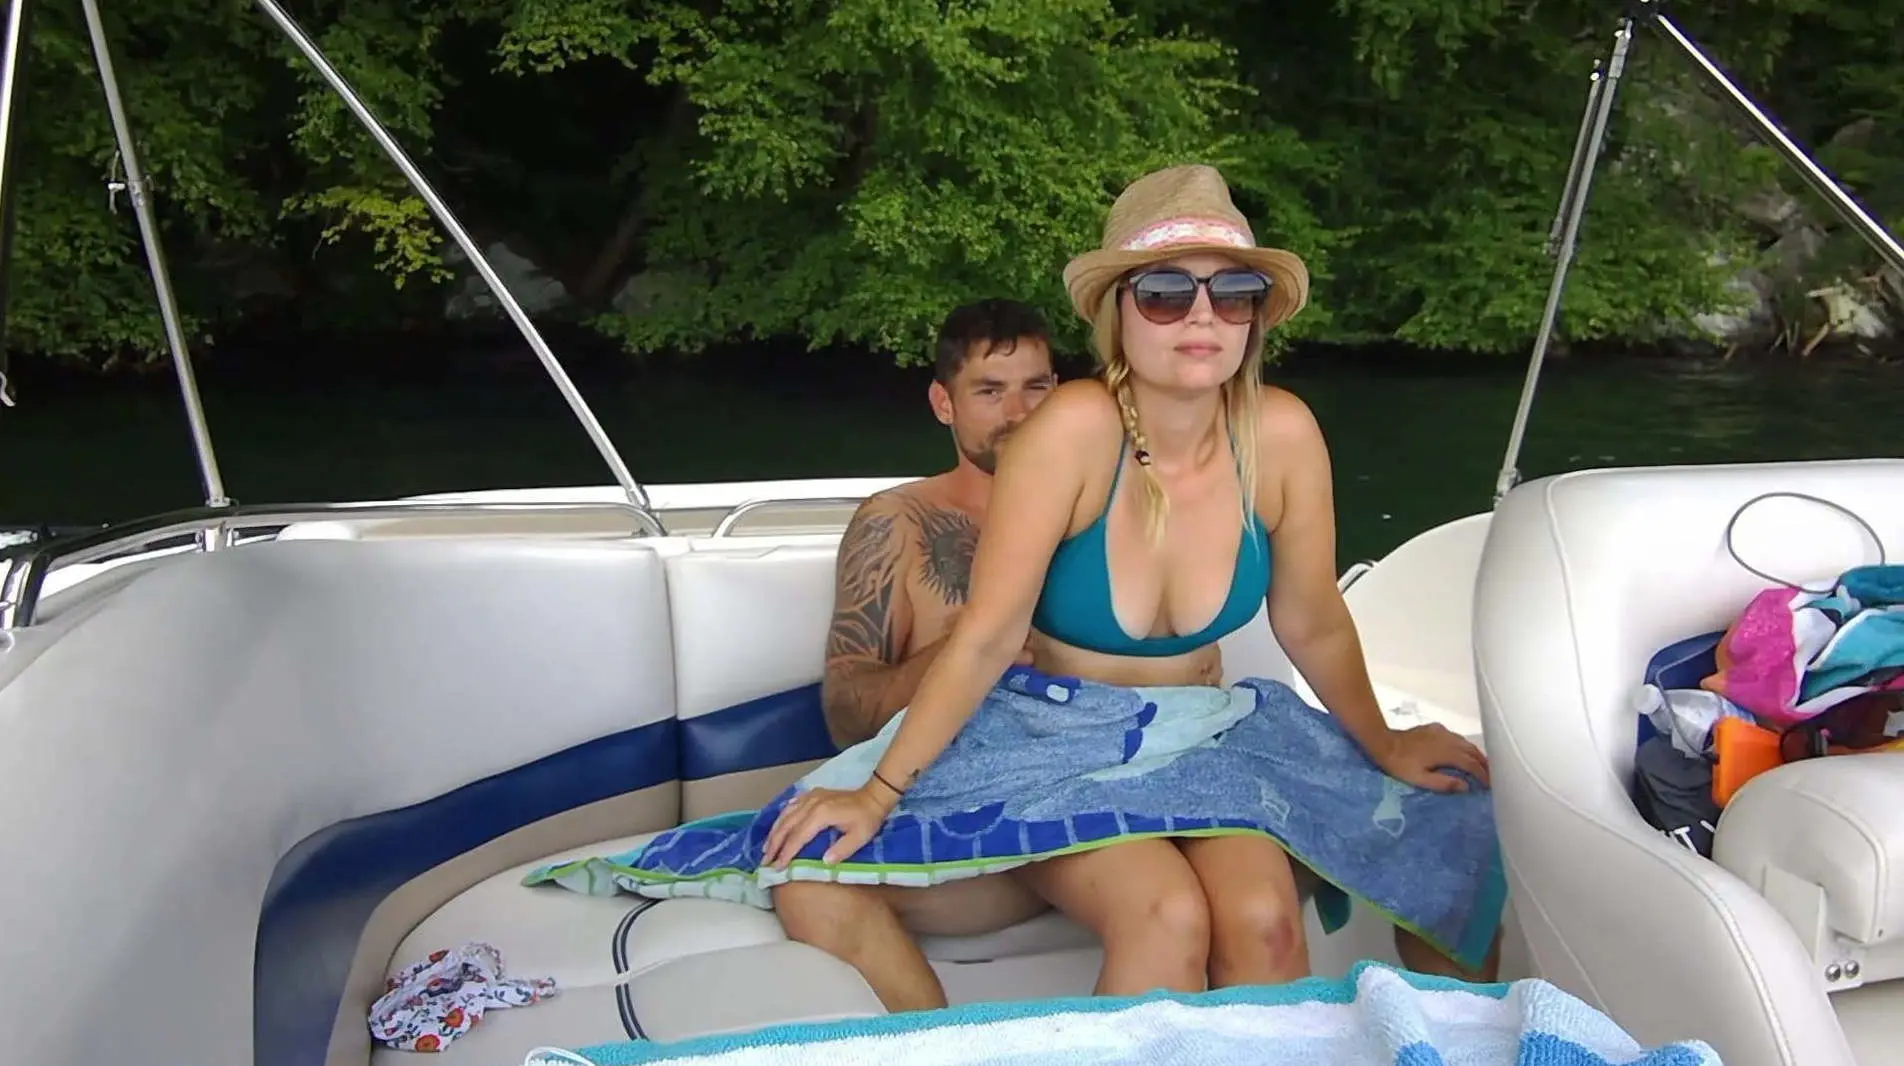 Some fun with public sex on our boat picture